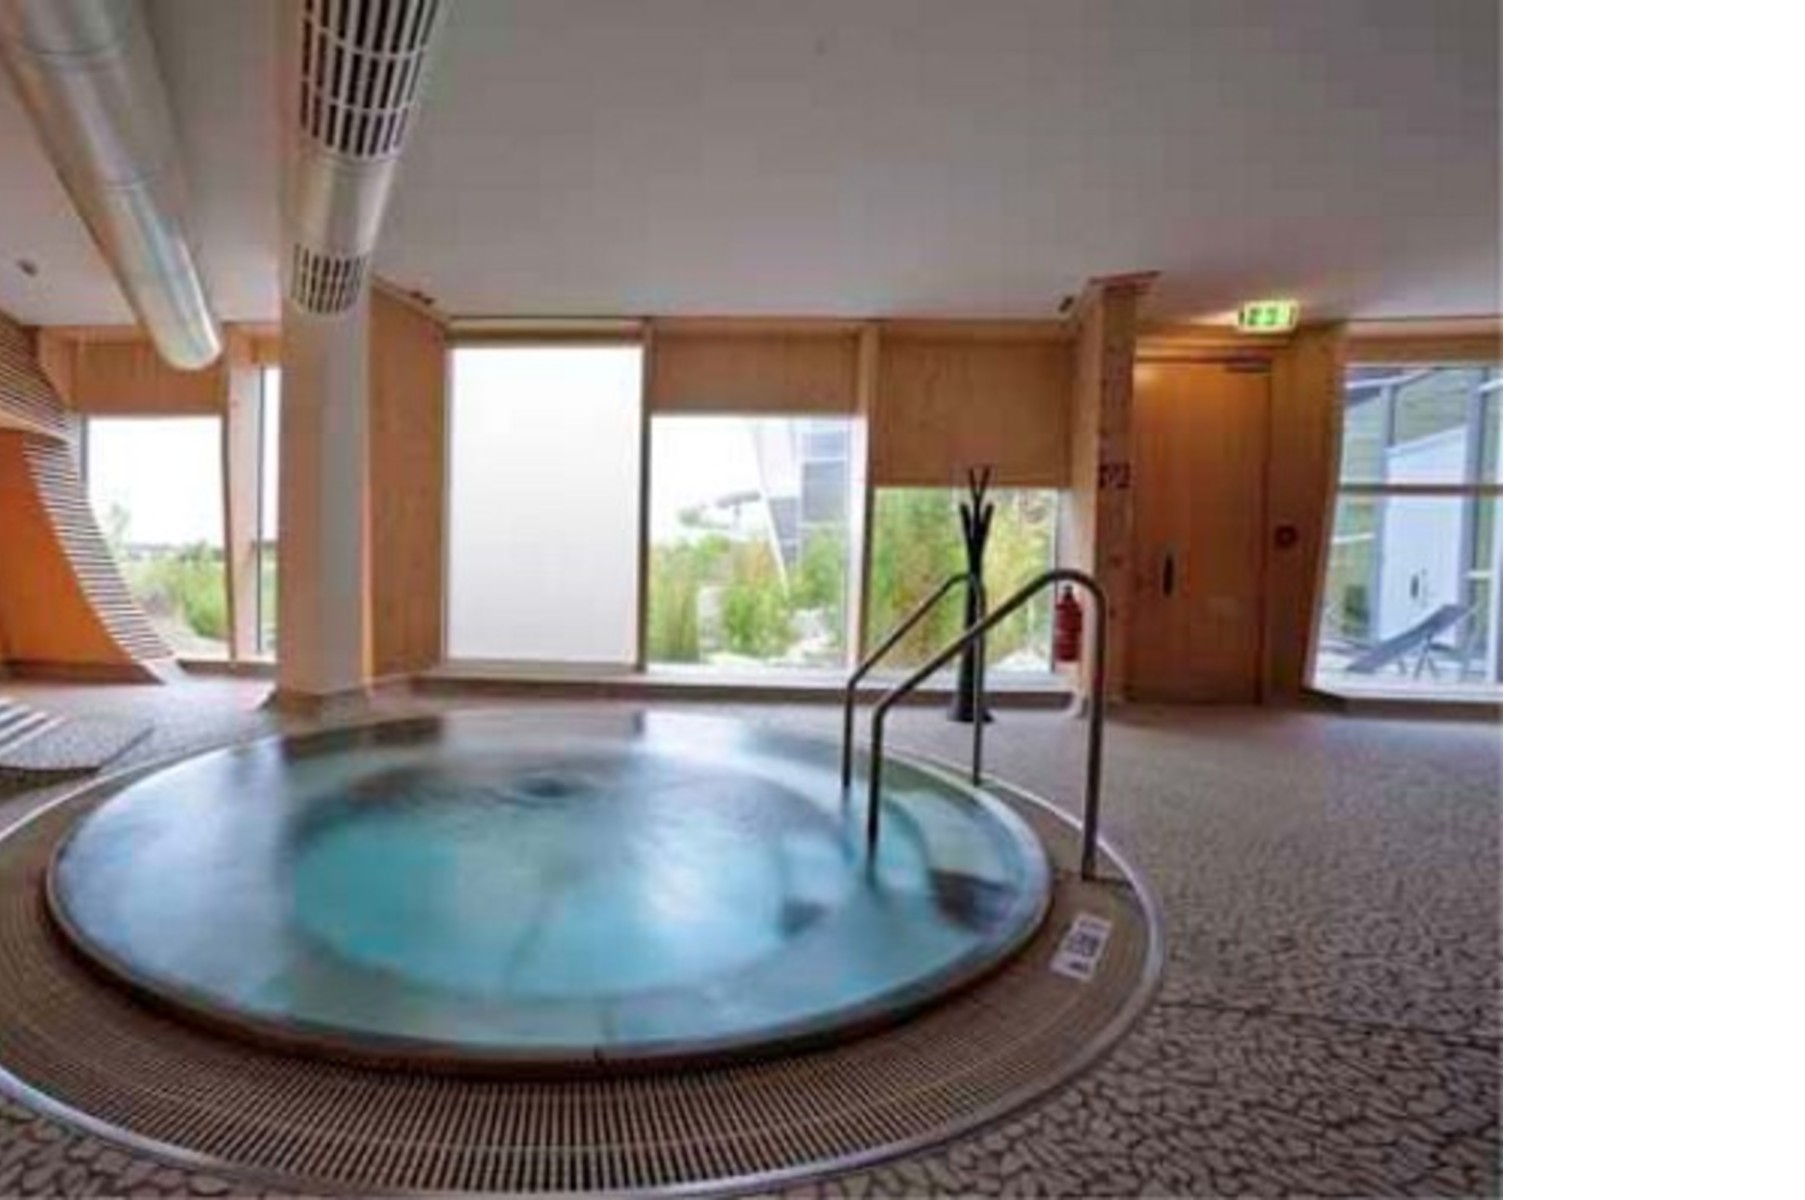 Les Thermes In Strassen Luxembourg Floornature